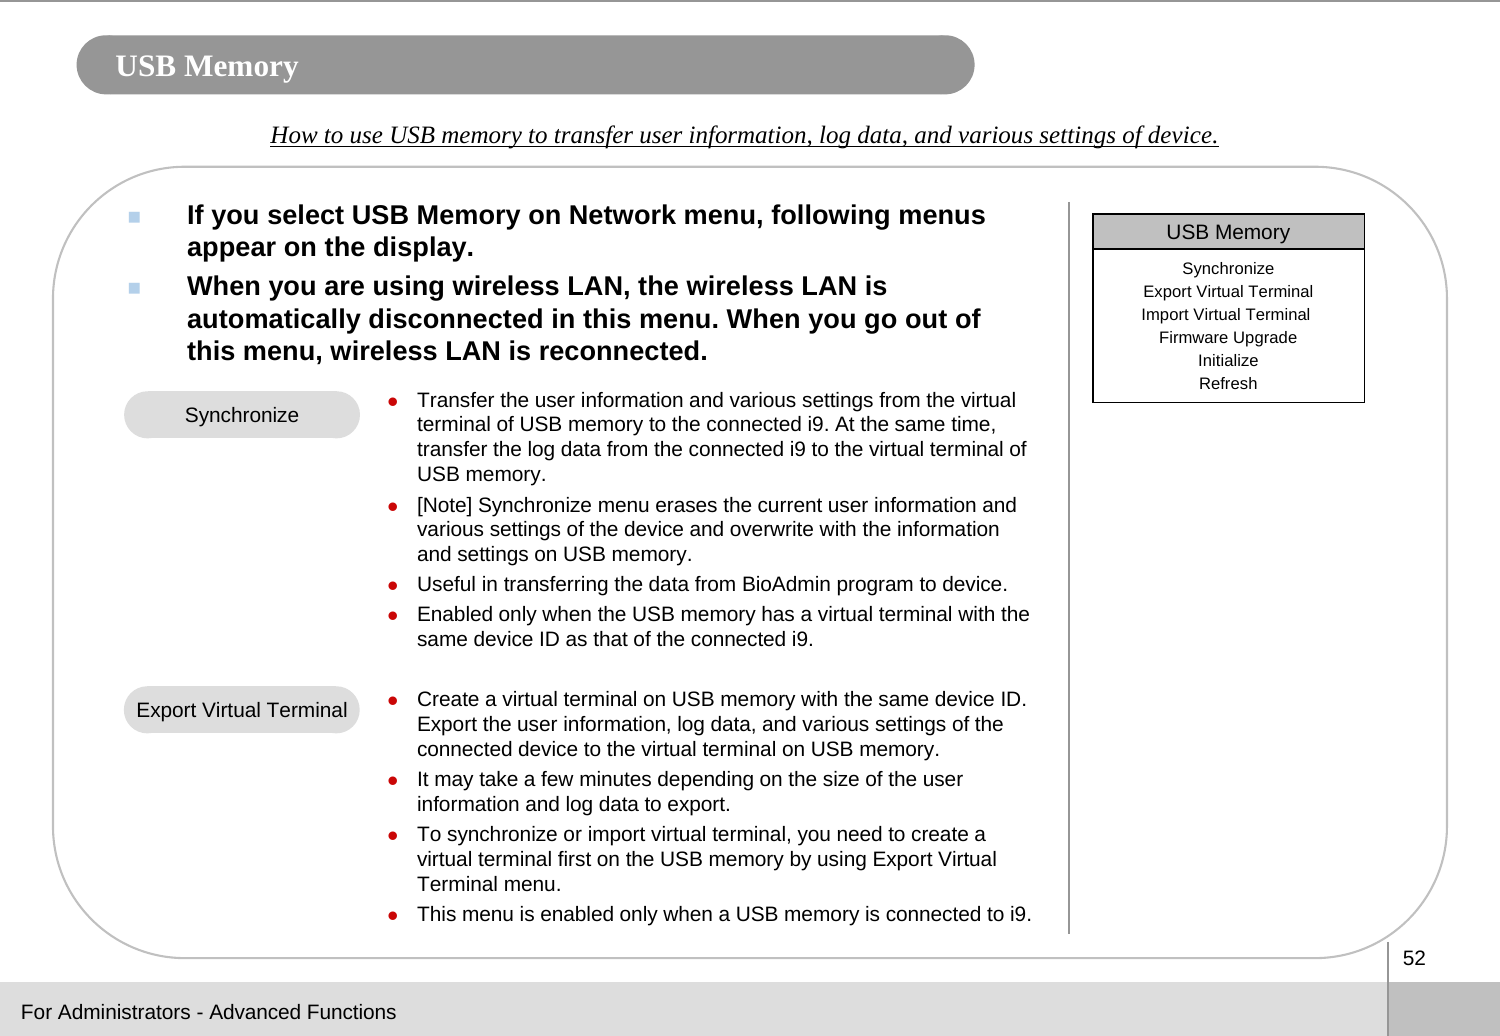 52USB MemoryIf you select USB Memory on Network menu, following menus appear on the display. When you are using wireless LAN, the wireless LAN is automatically disconnected in this menu. When you go out of this menu, wireless LAN is reconnected.How to use USB memory to transfer user information, log data, and various settings of device. For Administrators - Advanced FunctionszTransfer the user information and various settings from the virtual terminal of USB memory to the connected i9. At the same time, transfer the log data from the connected i9 to the virtual terminal of USB memory. z[Note] Synchronize menu erases the current user information and various settings of the device and overwrite with the information and settings on USB memory.  zUseful in transferring the data from BioAdmin program to device.zEnabled only when the USB memory has a virtual terminal with thesame device ID as that of the connected i9. zCreate a virtual terminal on USB memory with the same device ID.Export the user information, log data, and various settings of the connected device to the virtual terminal on USB memory. zIt may take a few minutes depending on the size of the user information and log data to export. zTo synchronize or import virtual terminal, you need to create a virtual terminal first on the USB memory by using Export VirtualTerminal menu. zThis menu is enabled only when a USB memory is connected to i9.SynchronizeExport Virtual TerminalUSB MemorySynchronizeExport Virtual TerminalImport Virtual Terminal Firmware UpgradeInitializeRefresh